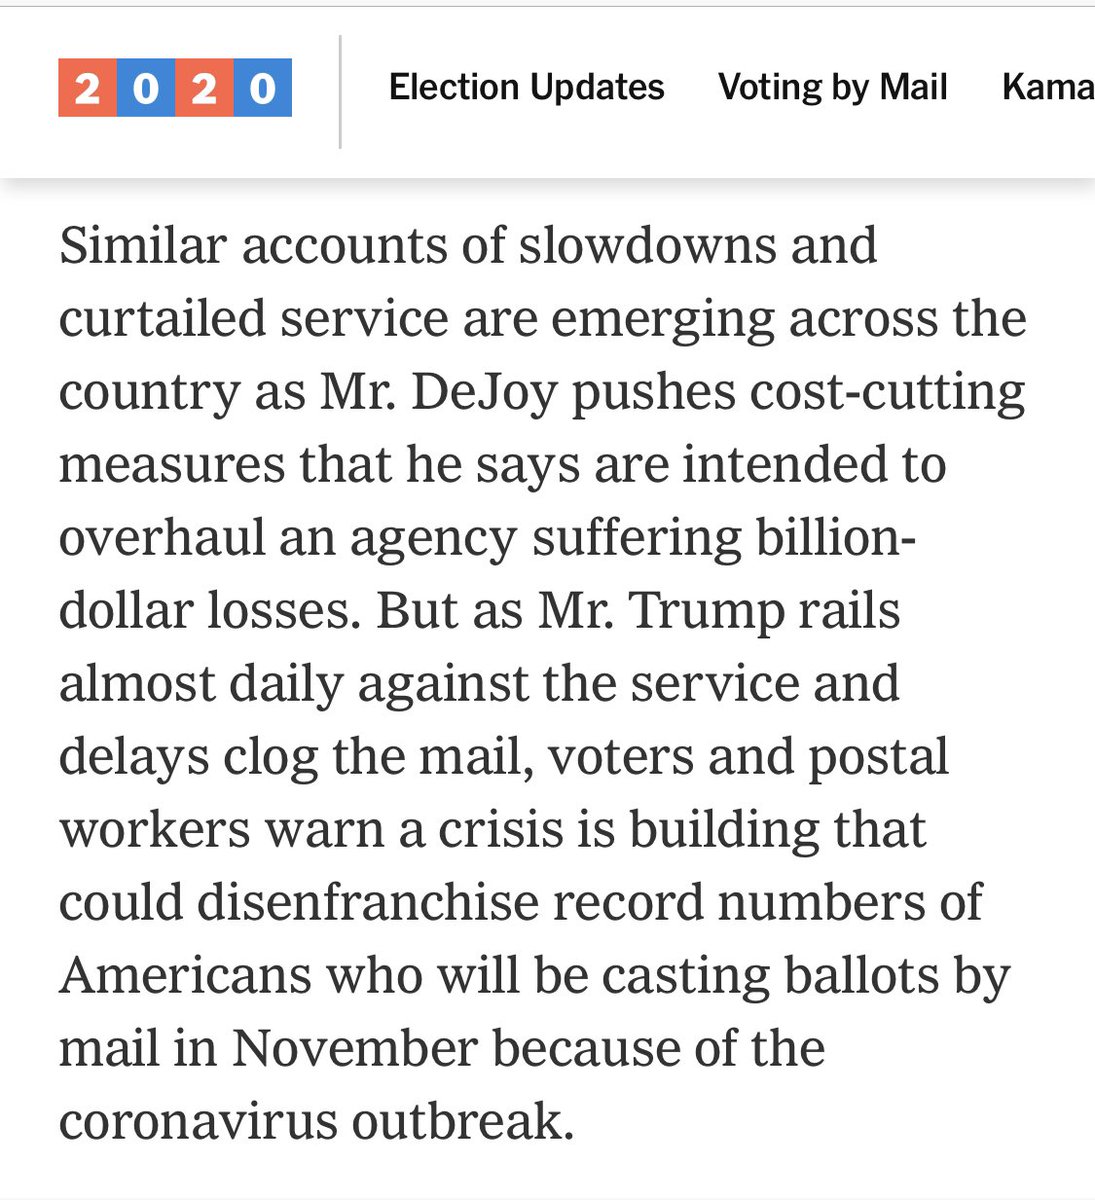 It is so incredibly fitting that, if dictatorship were to come to America, it would invade under the smokescreen of neoliberal managerial cost-cutting. https://www.nytimes.com/2020/08/15/us/post-office-vote-by-mail.html